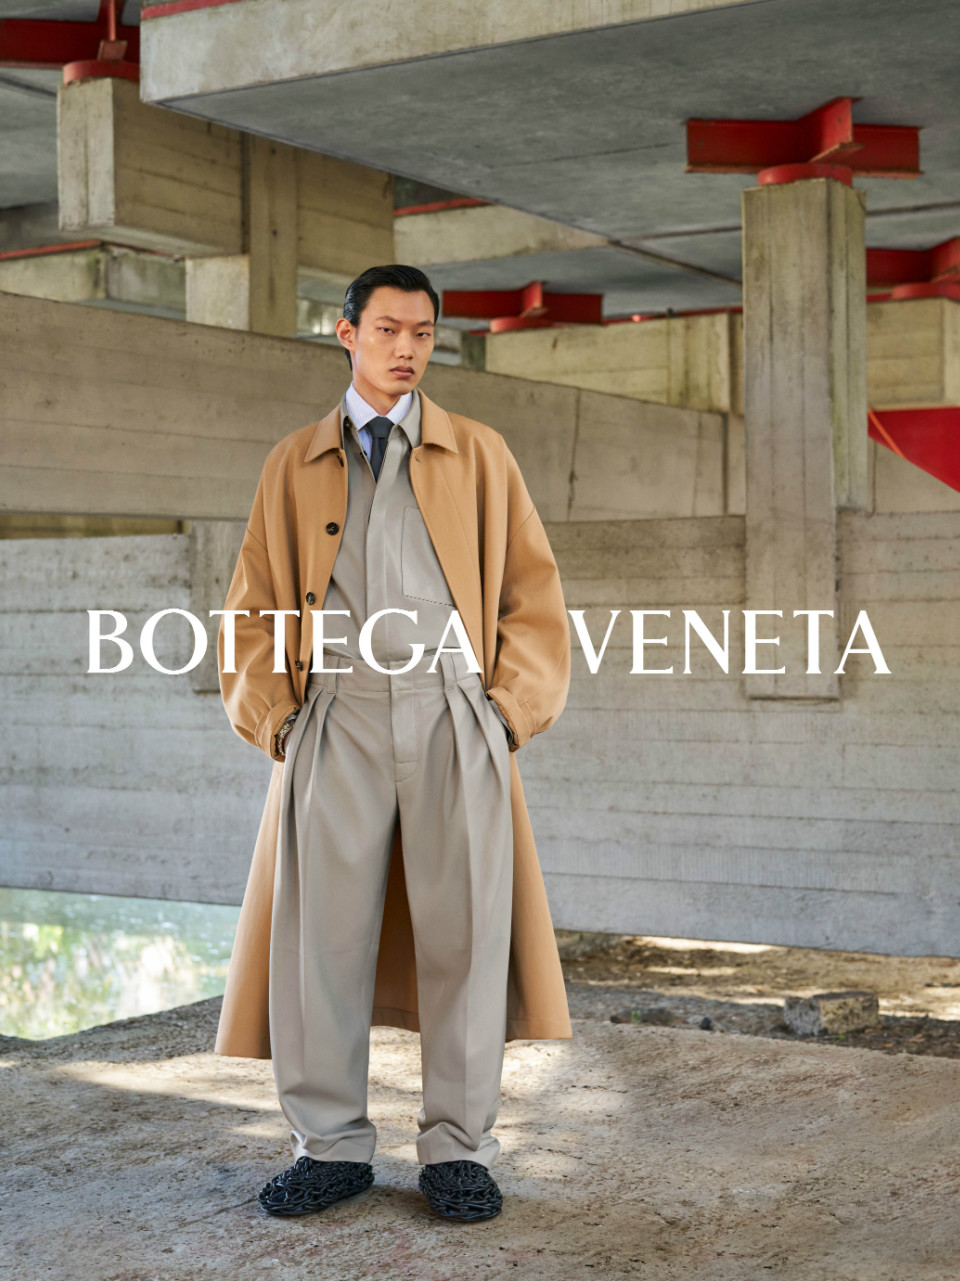 Bottega Veneta's Winter 2023 Campaign Pays Homage to the Power of  Architecture in New Film and Imagery